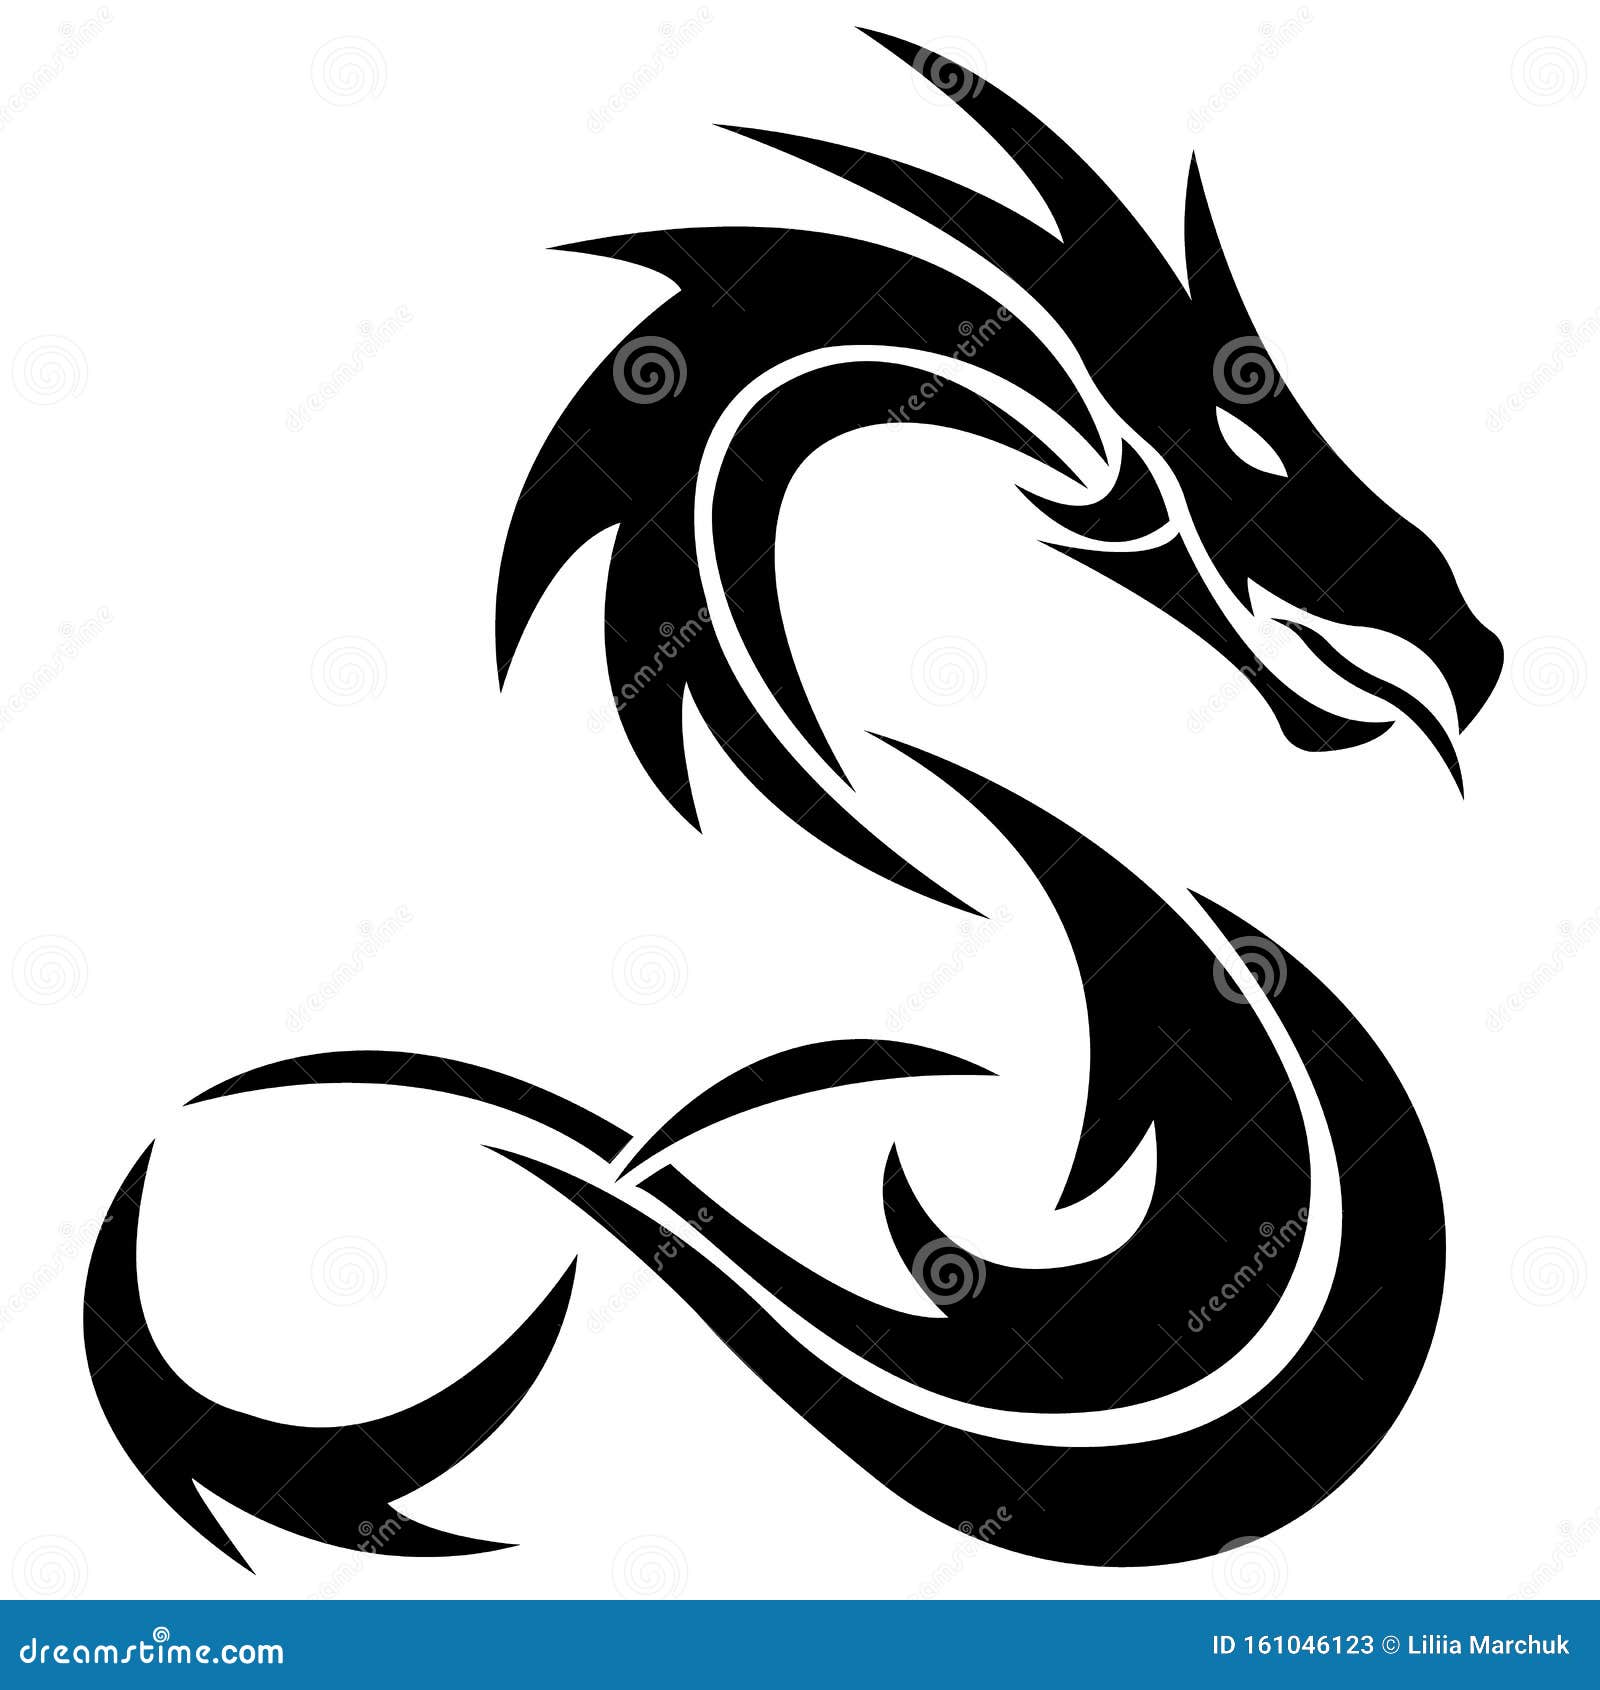 The Dragon`s Silhouette is Painted Black with a Variety of Lines. Dragon  Animal Logo Stock Illustration - Illustration of dragon, legend: 161046123